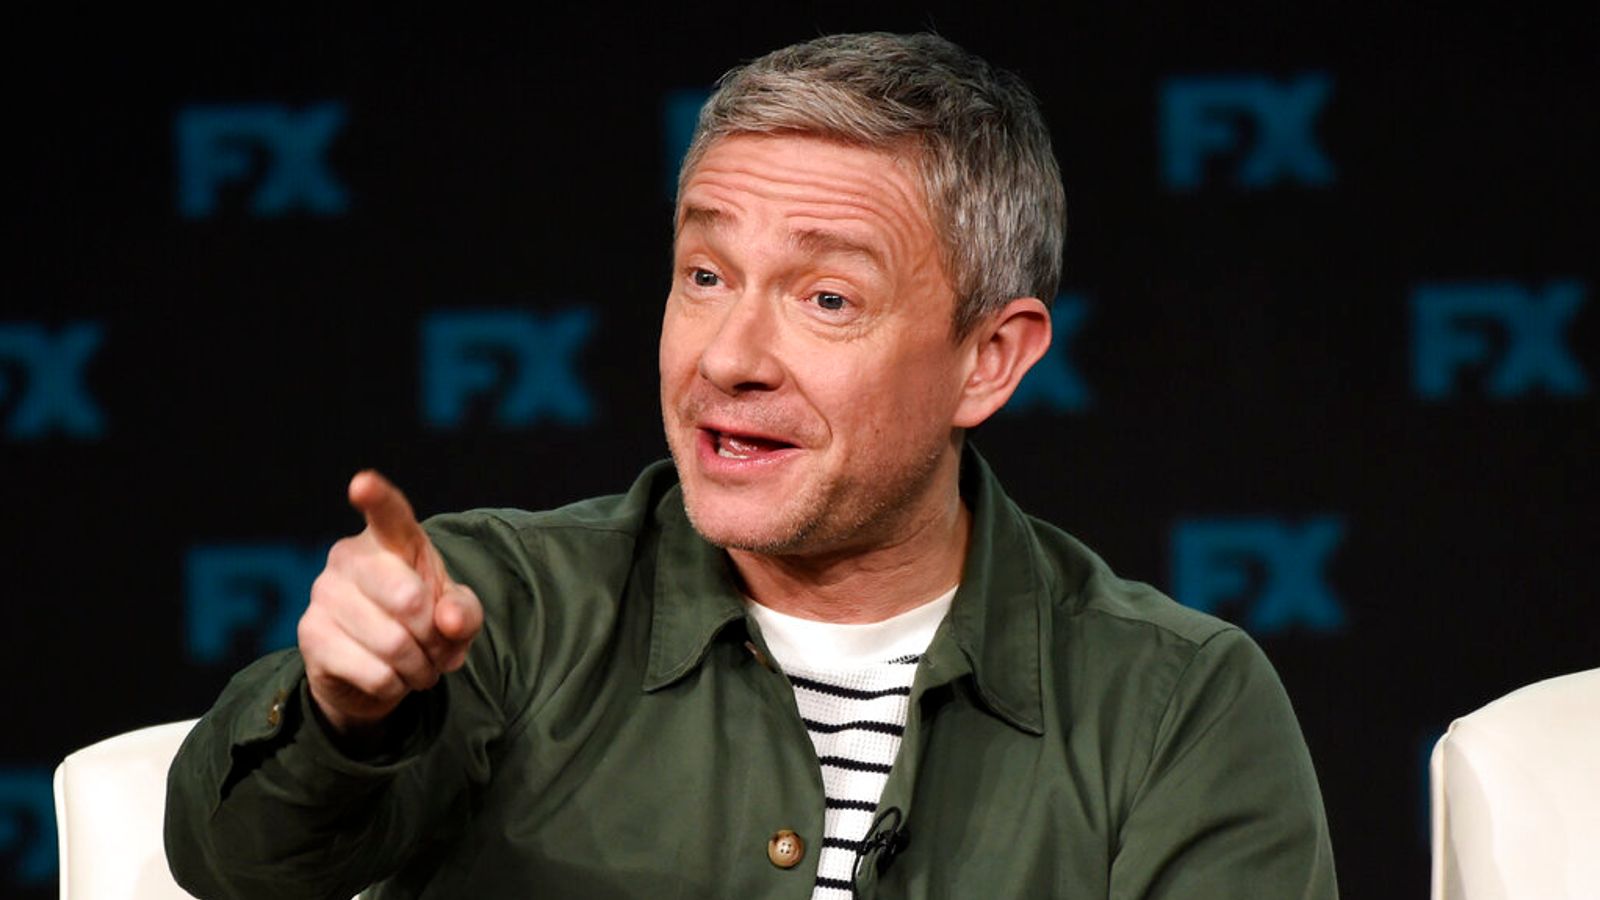 Martin Freeman gives up on vegetarianism after 38 years